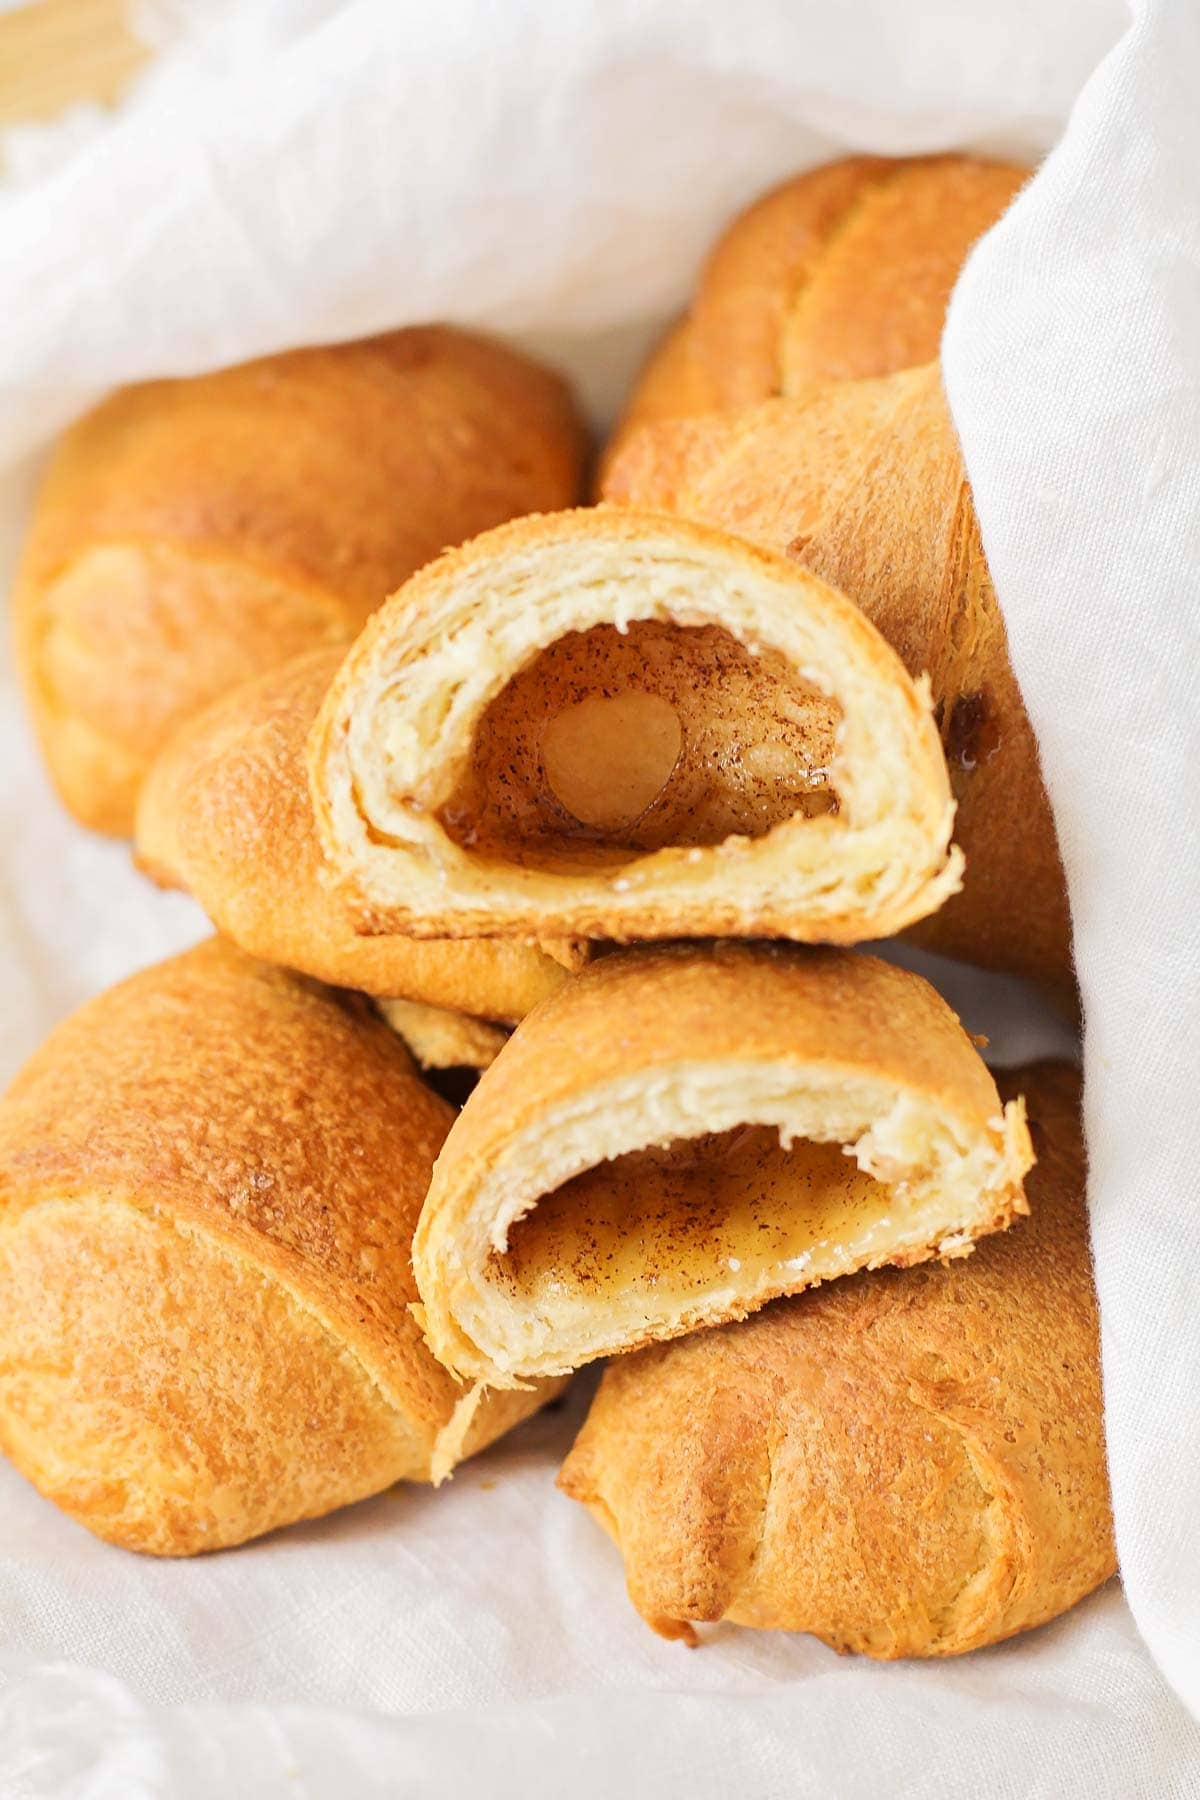 Resurrection rolls made from crescents with one cut in half.